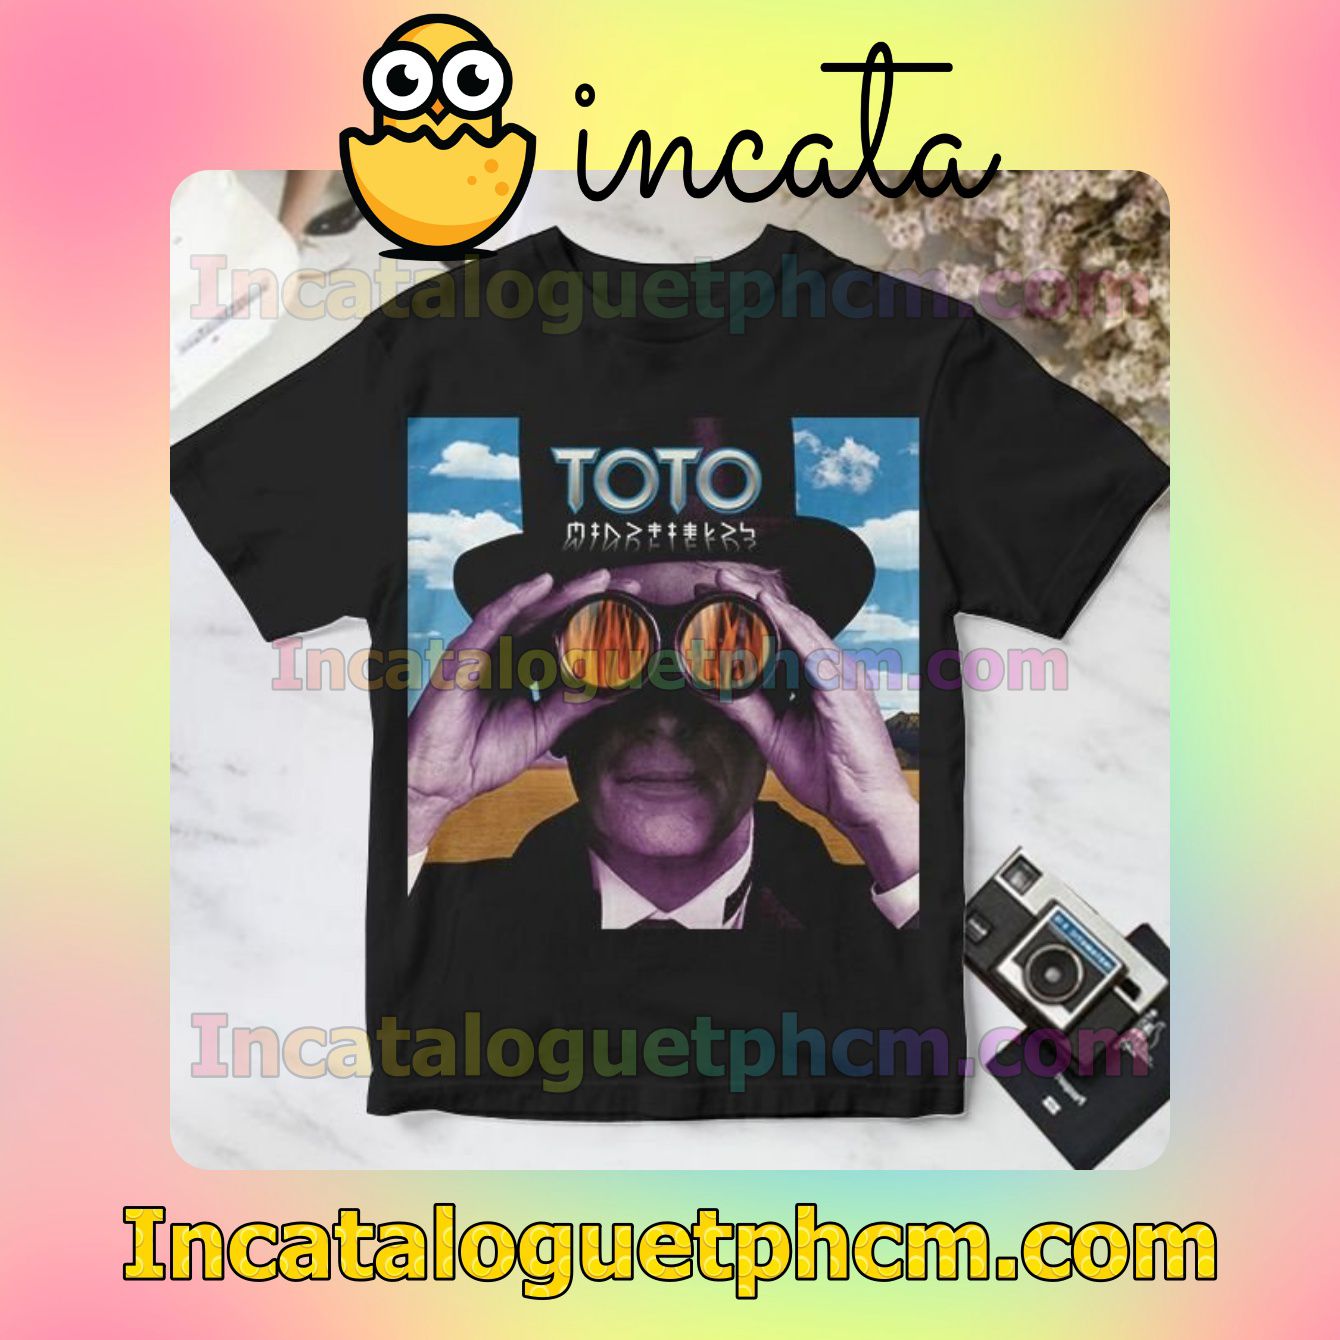 Toto Mindfields Album Cover Personalized Shirt